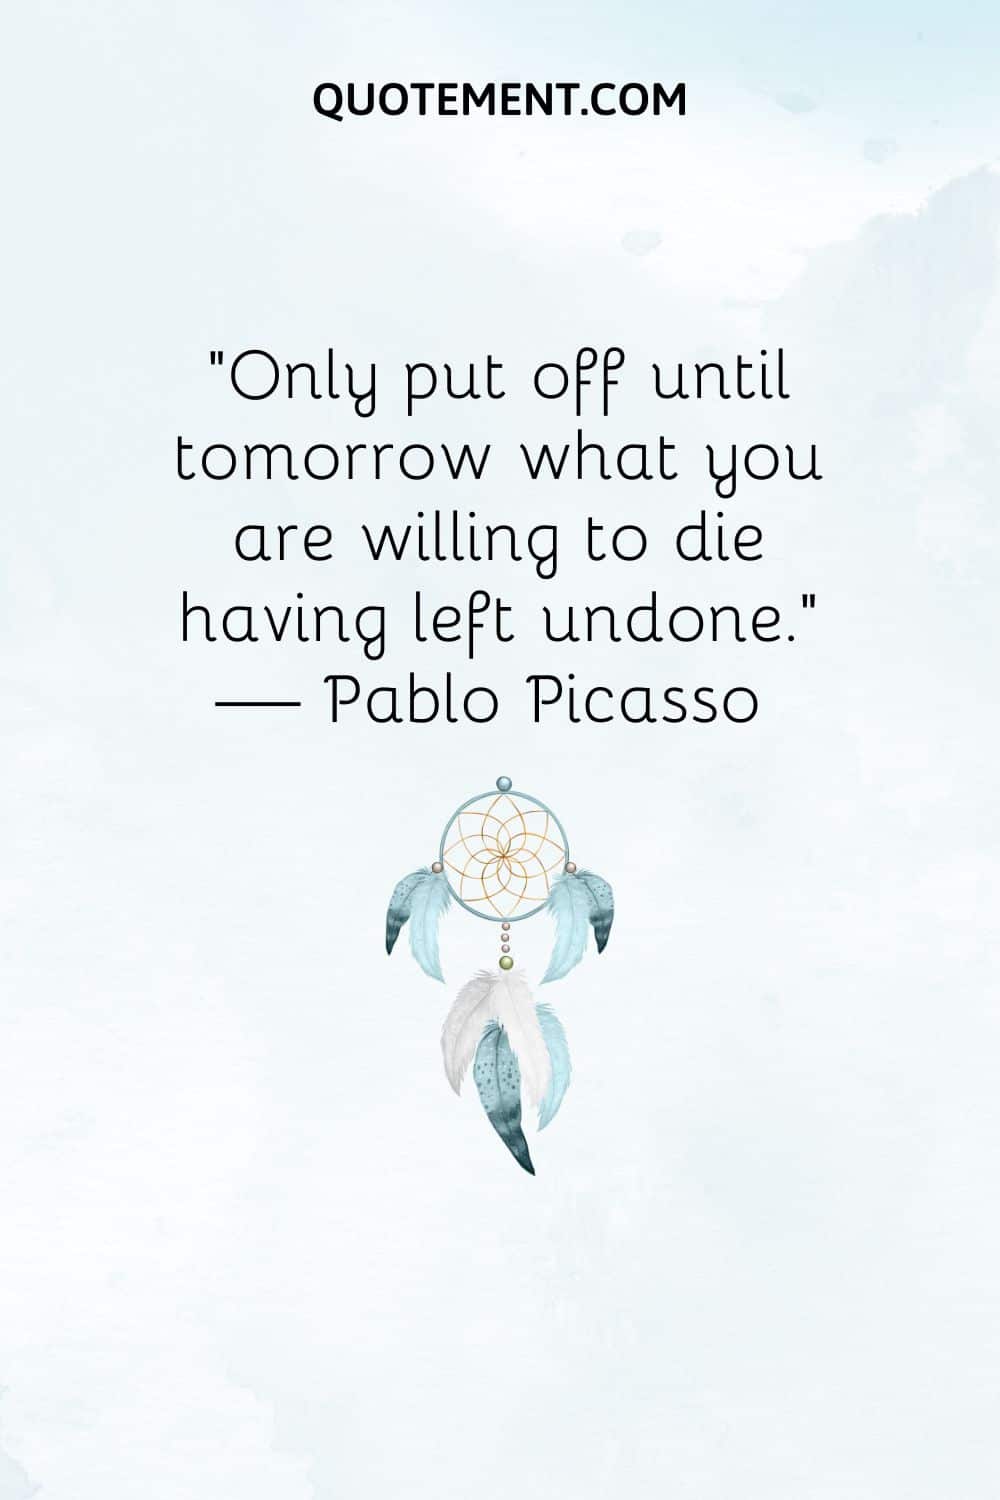 “Only put off until tomorrow what you are willing to die having left undone.” — Pablo Picasso